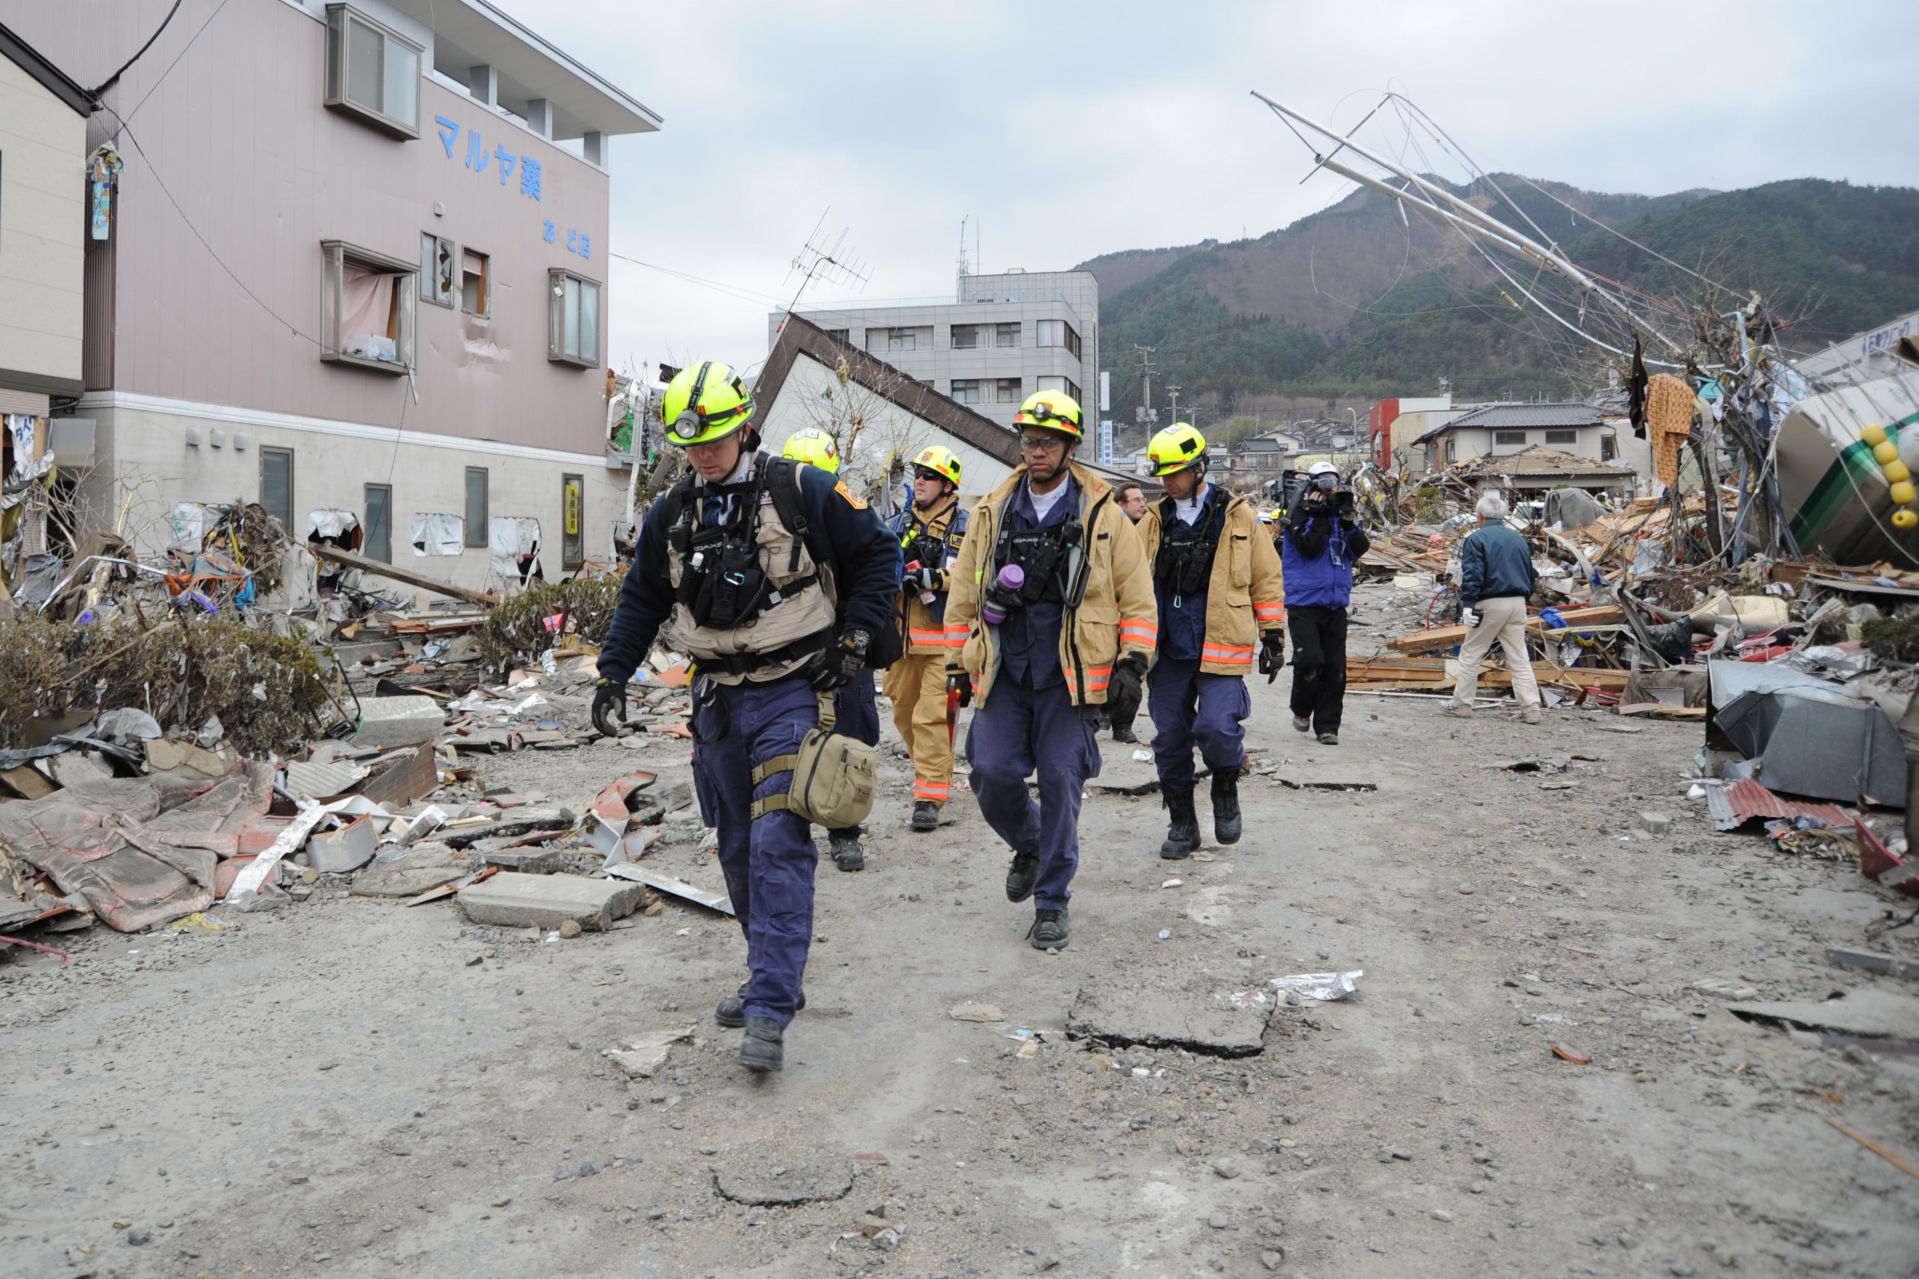 Members of the Fairfax County Urban Fire and Rescue Team head into downtown Ofunato to search for survivors following an 8.9-magnitude earthquake, which triggered a devastating tsunami through this Japanese coastal city. Teams from the United States, United Kingdom and China are on scene to assist in searching for missing residents.